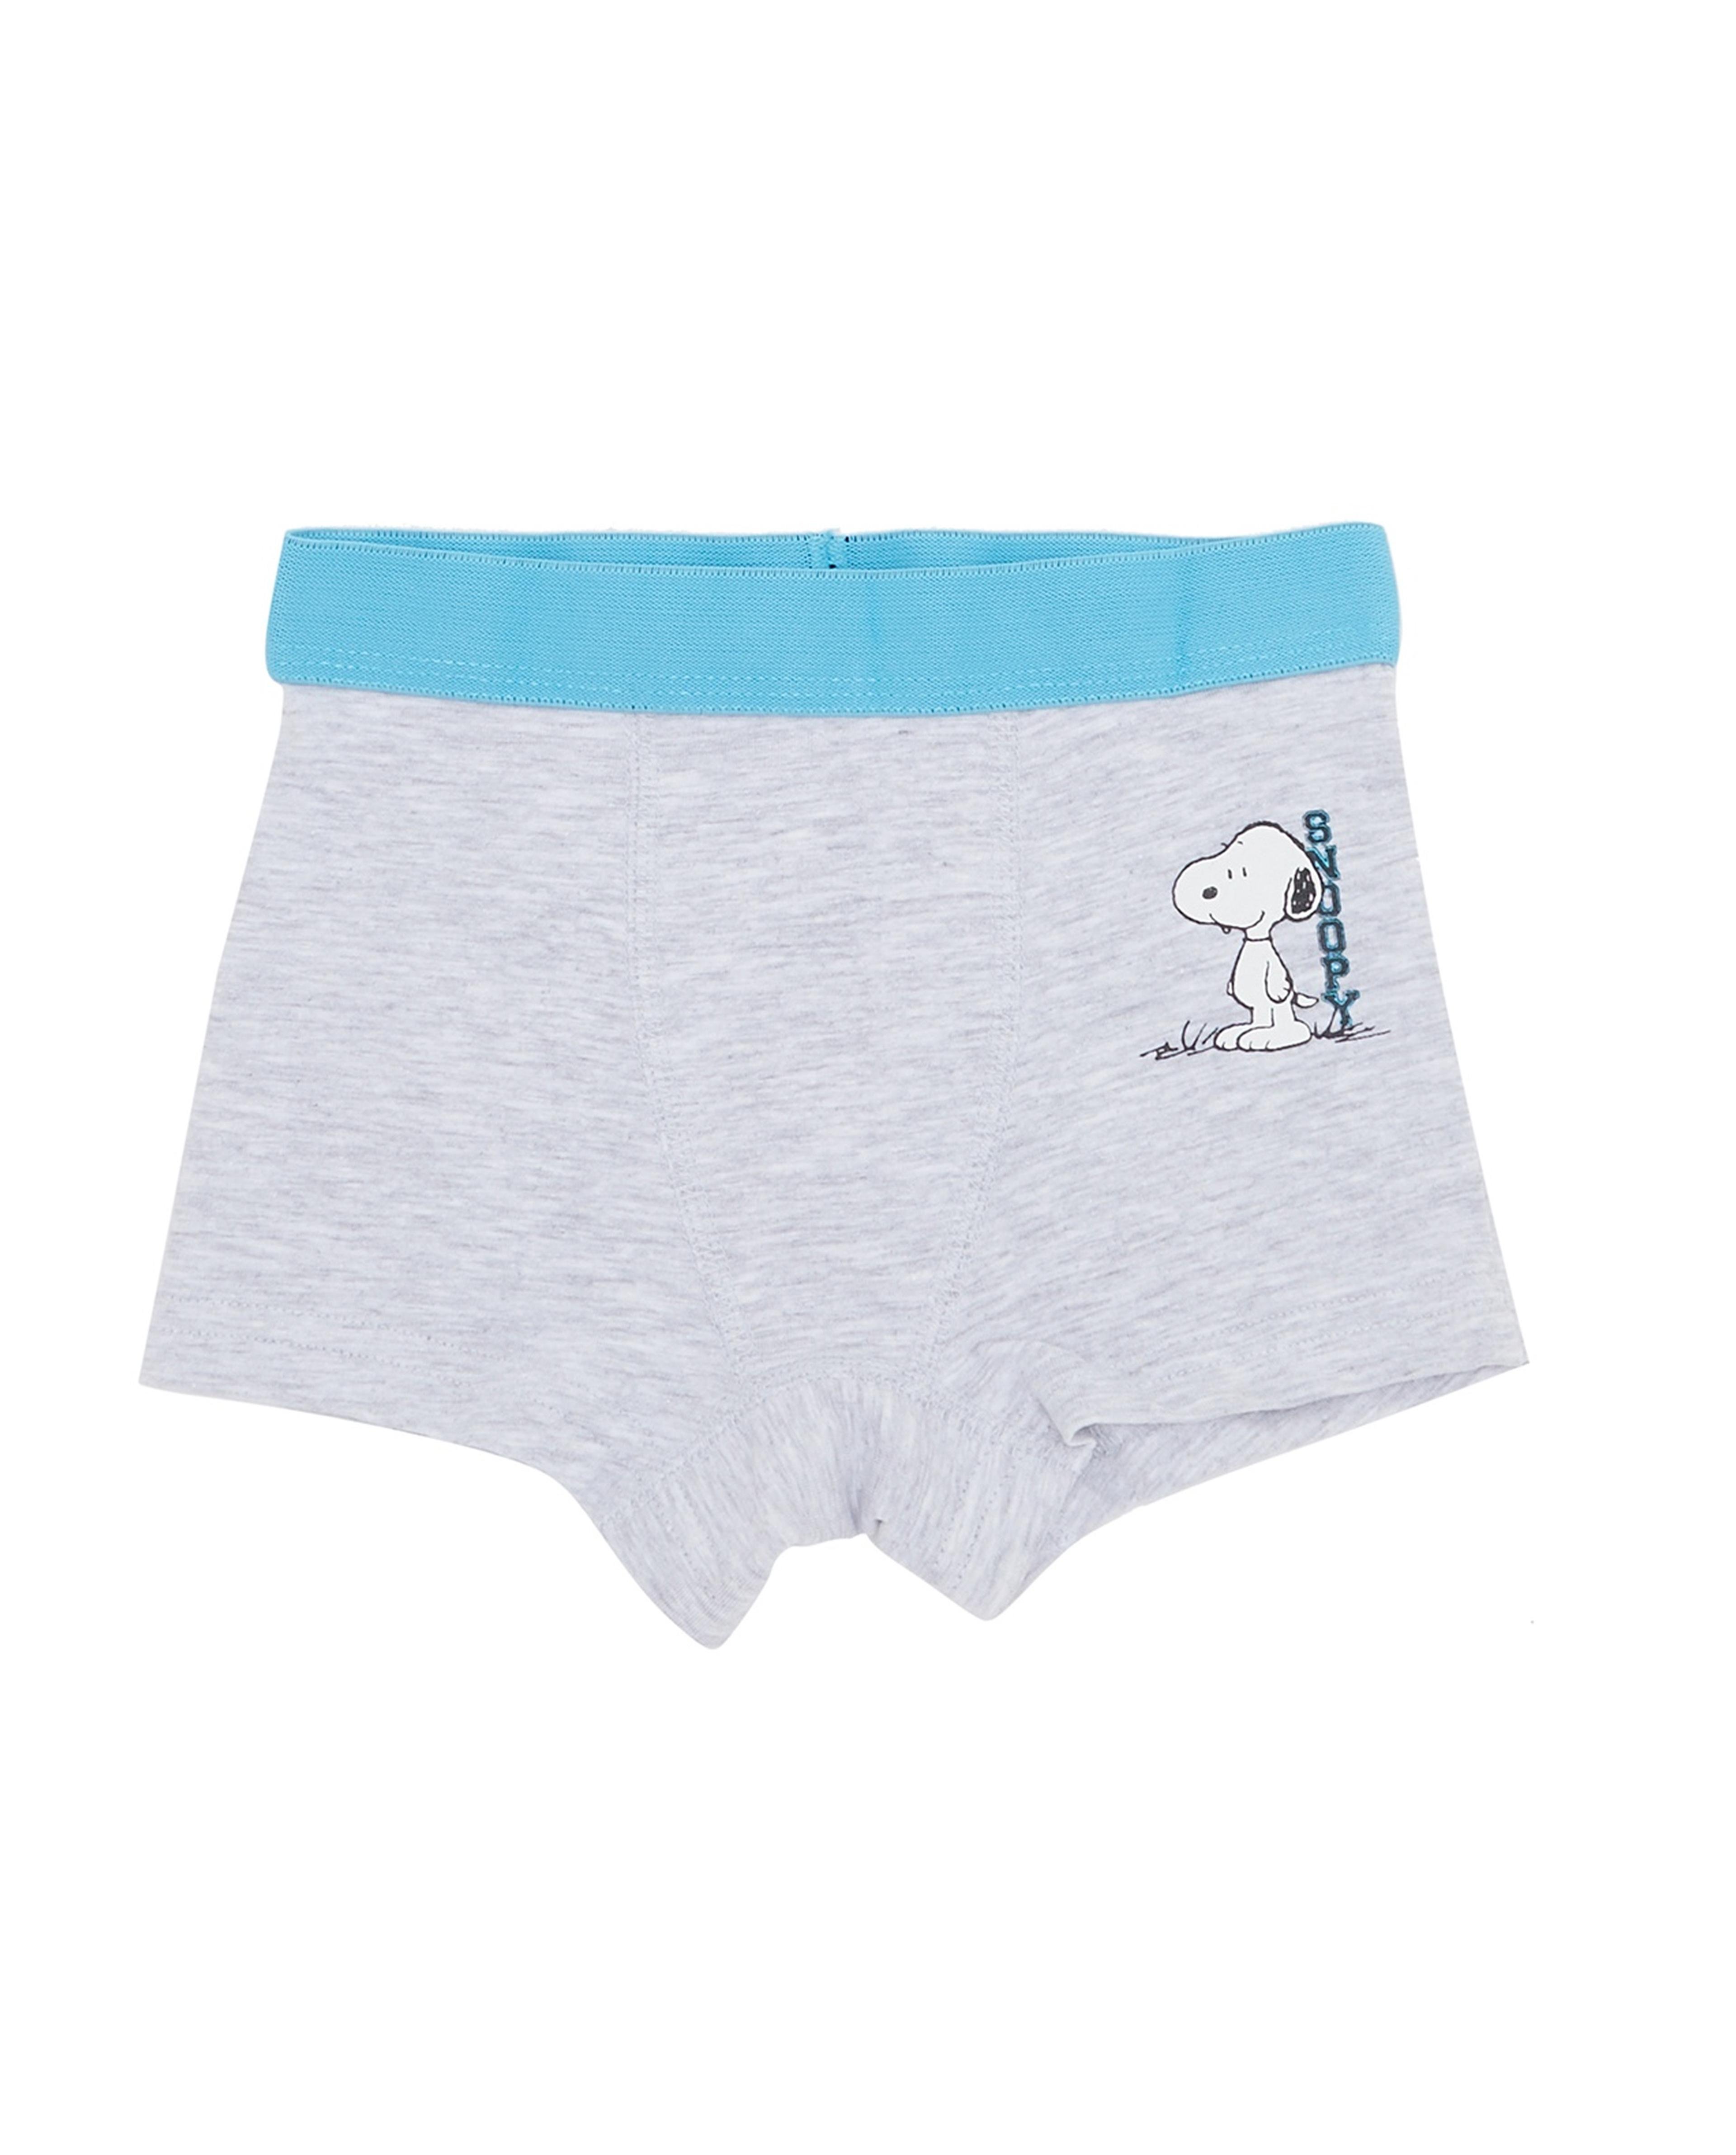 3 Pack Snoopy Print Boxer Briefs